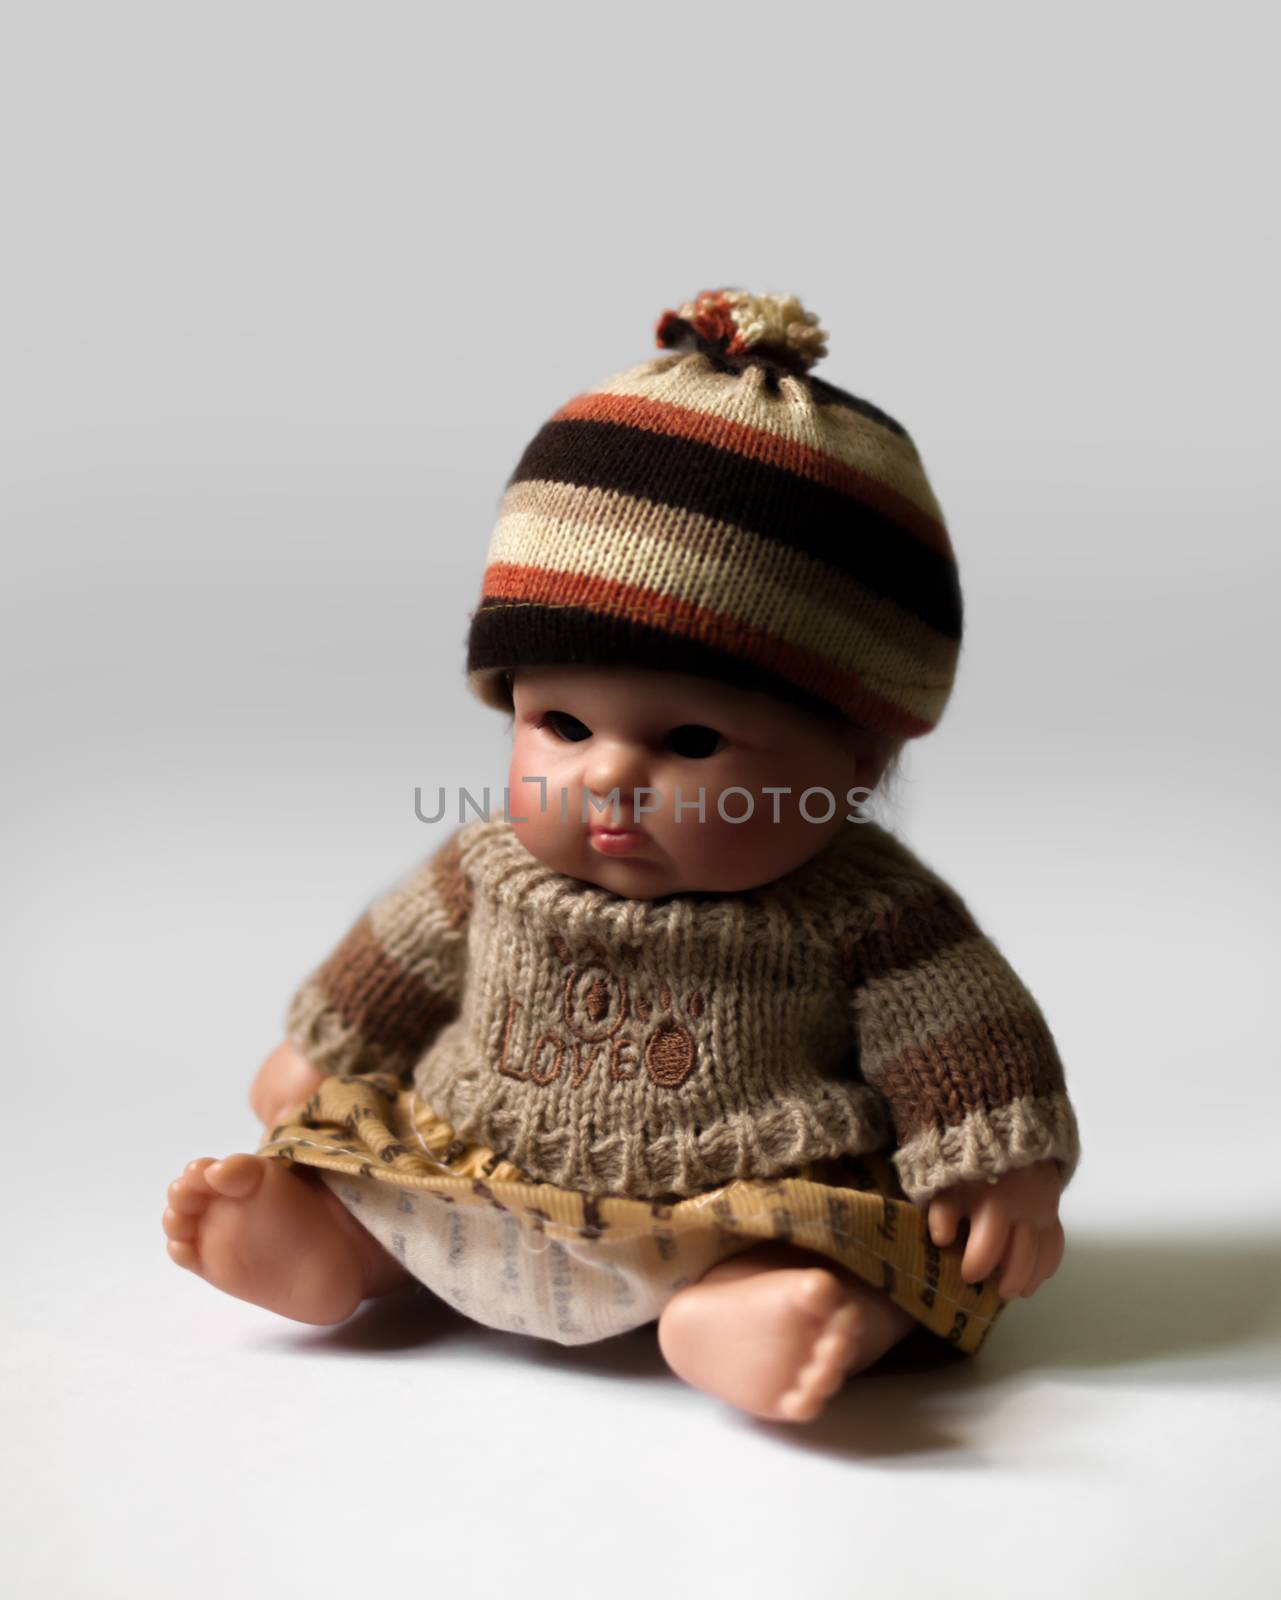 COLOR PHOTO OF SITTING DOLL